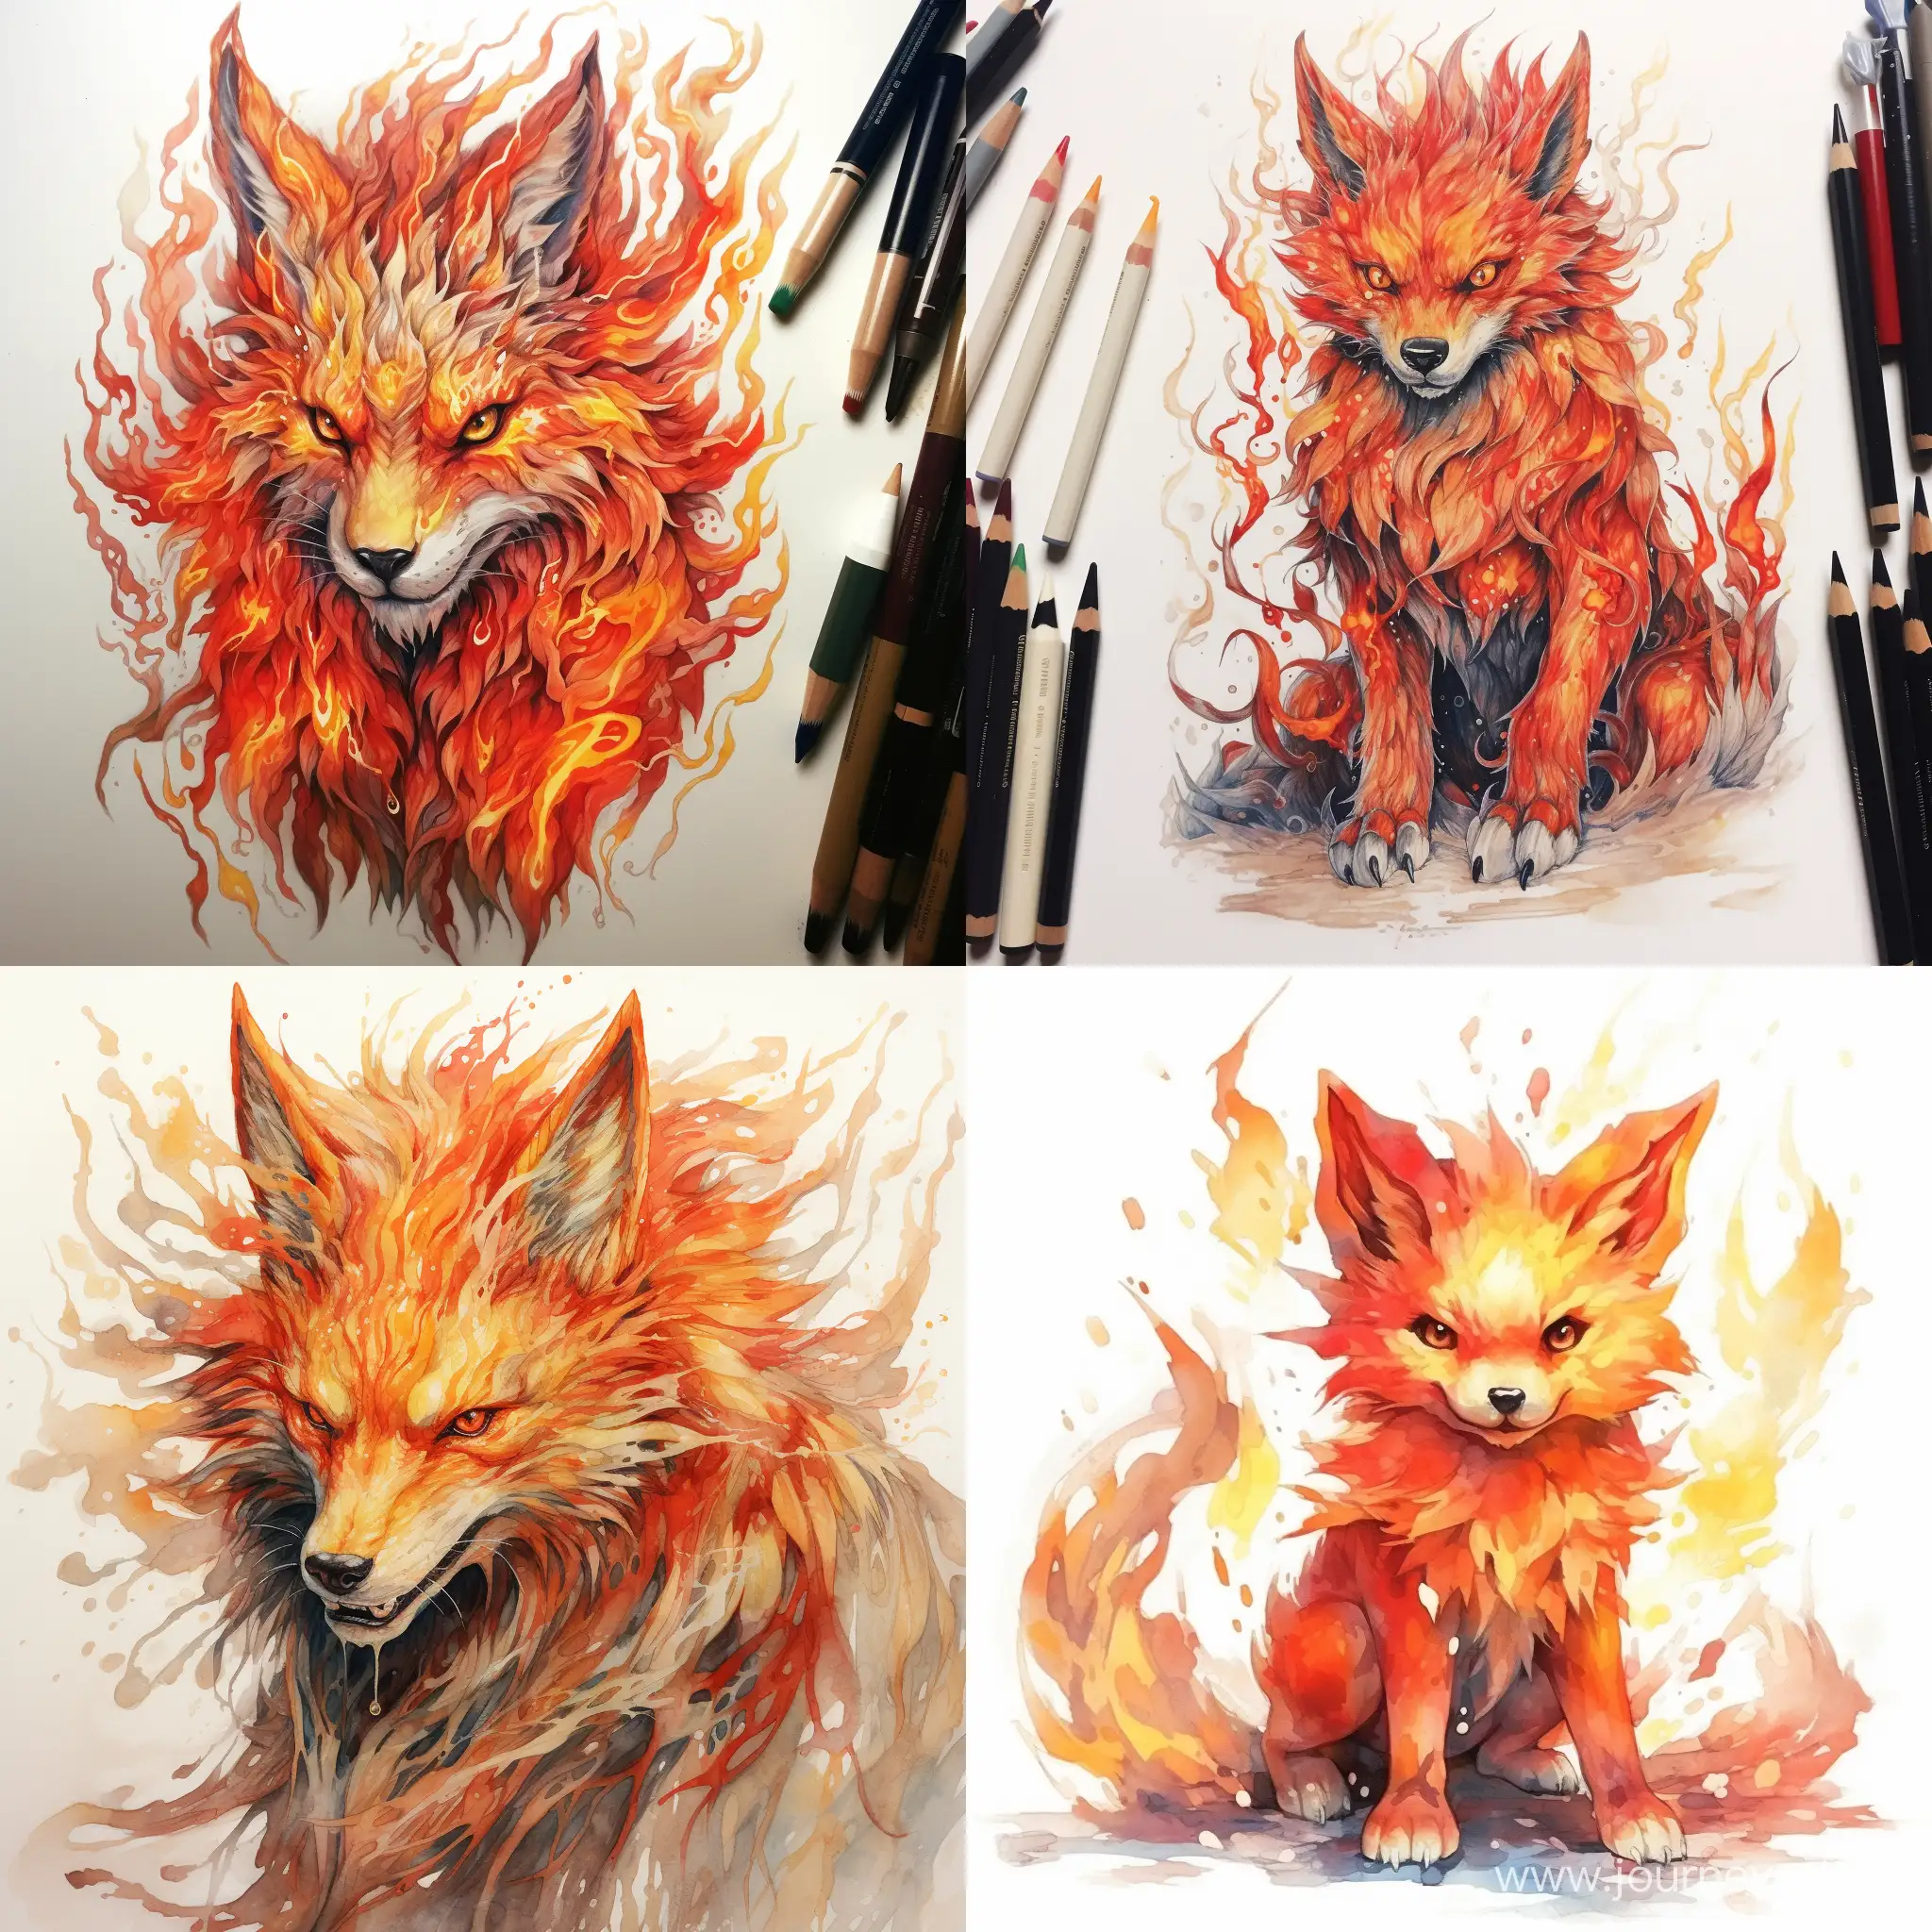 An anime fire animal monster, watercolor